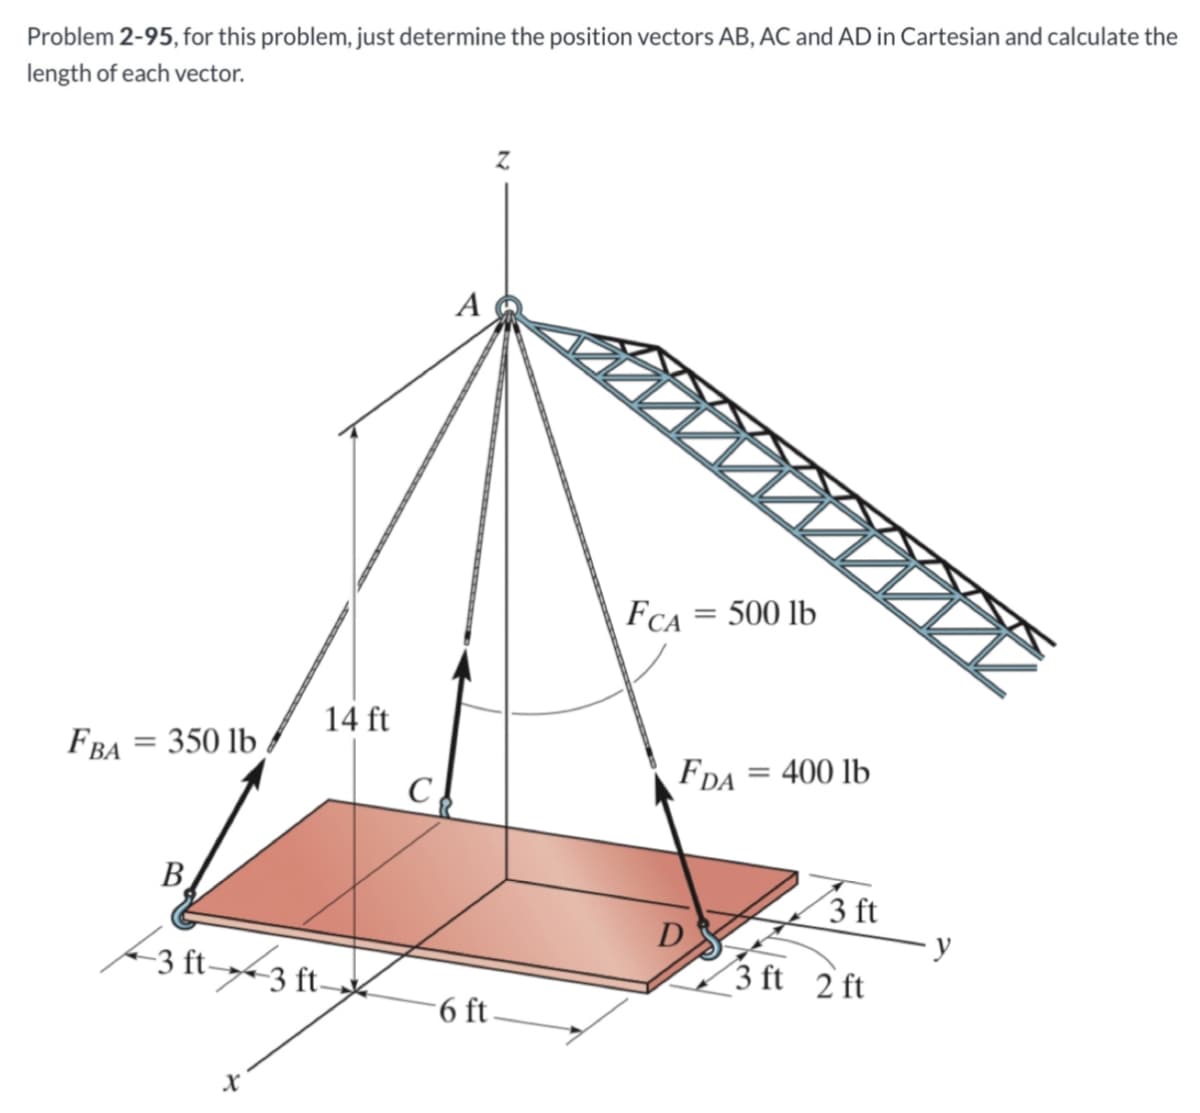 Problem 2-95, for this problem, just determine the position vectors AB, AC and AD in Cartesian and calculate the
length of each vector.
FBA
= 350 lb
14 ft
B
-~-3 ft 3 ft-
X
C
Z
6 ft.
FCA = 500 lb
FDA = 400 lb
D
3 ft
3 ft 2 ft
y